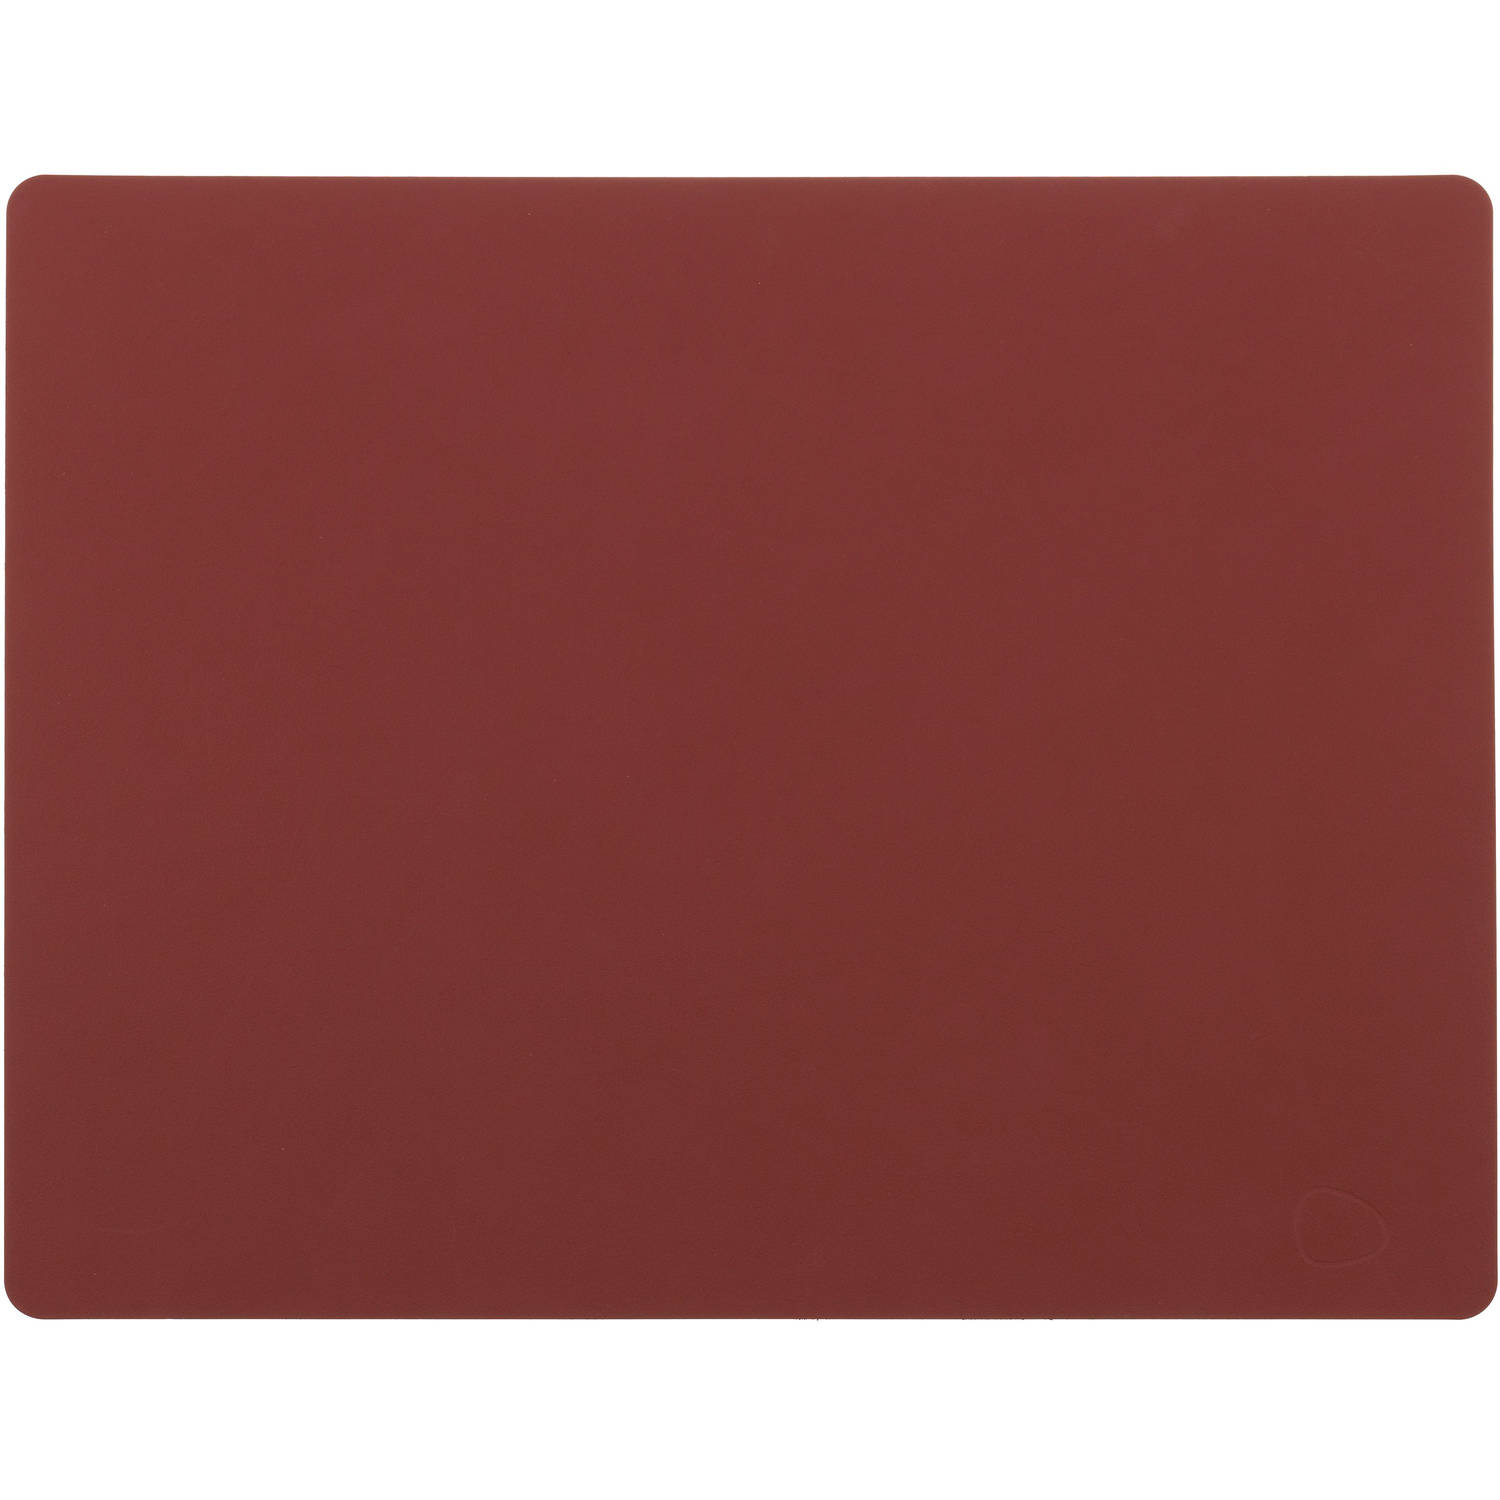 LIND DNA Placemat Nupo - Leer - Rood - 45 x 35 cm